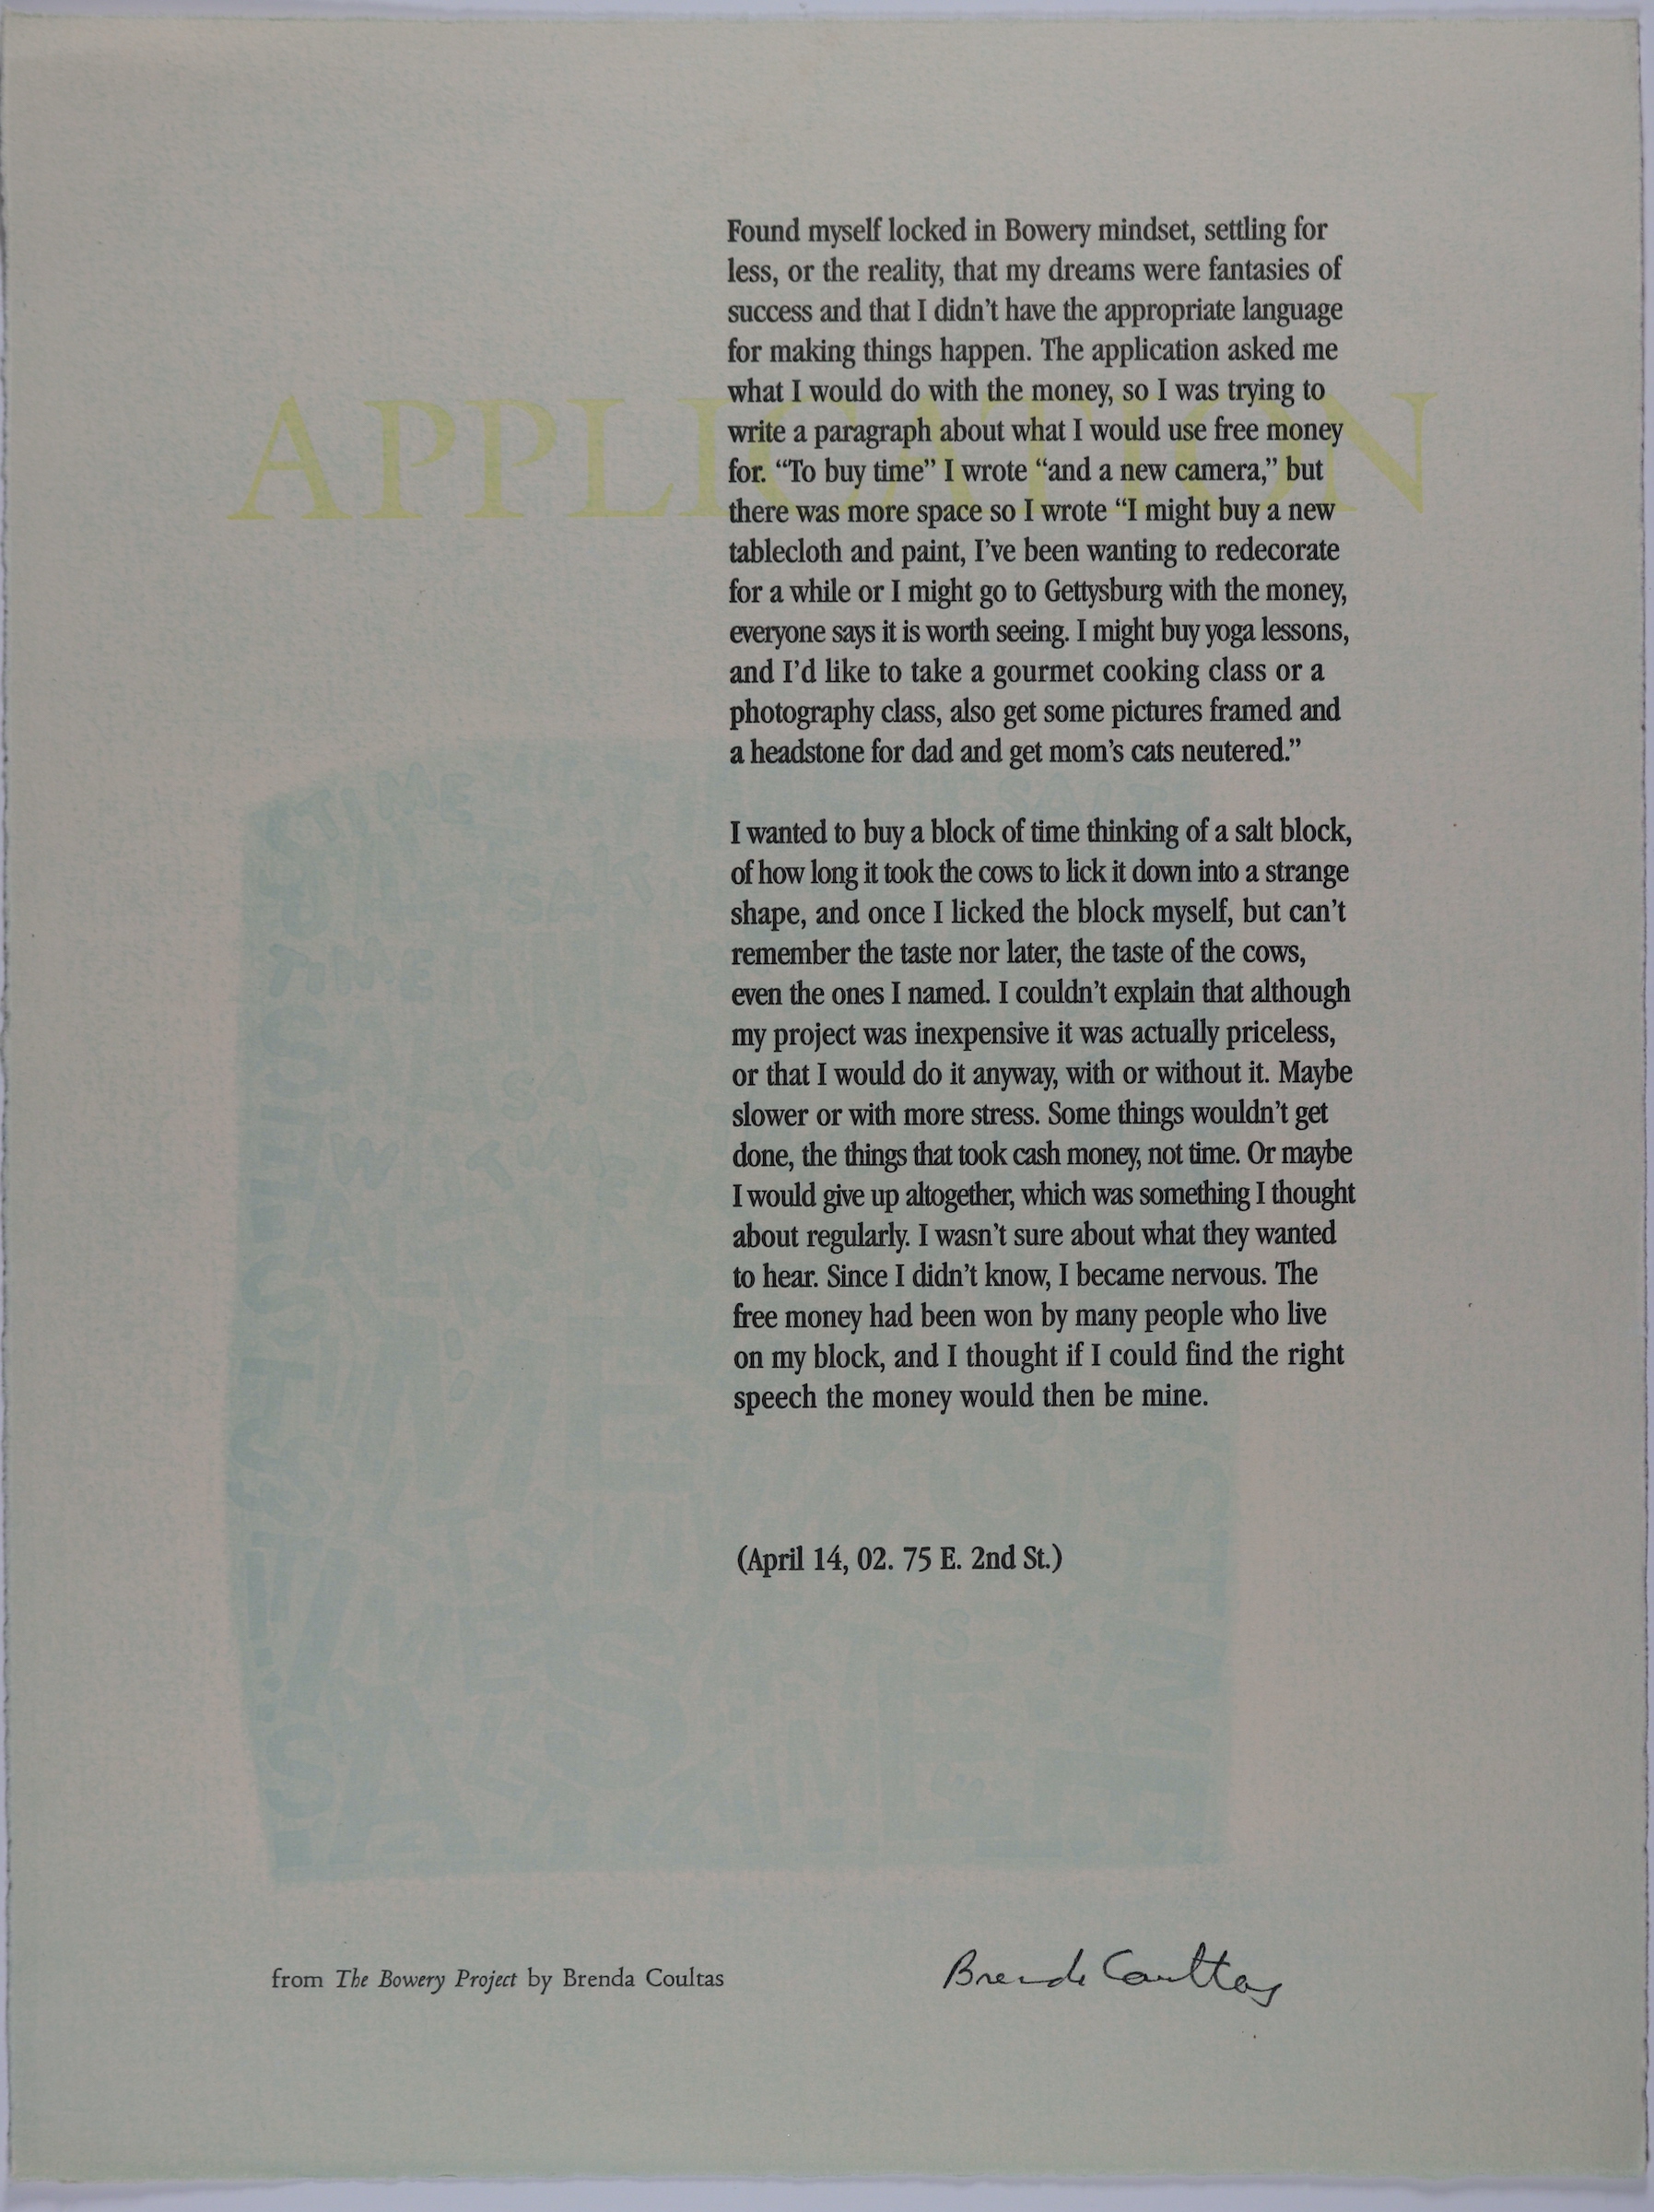 This broadside is long and vertically rectangular in size. It has a white colored background with the title in large, pale yellow letters that stretch horizontally across the broadside from left to right, behind the text. The text is formatted into two large paragraphs that are towards the right, in black font. There is a pale blue rectangle design also placed towards the bottom half of the broadside, behind the text. The pale blue rectangle is made up of letters, randomized ones in lower and upper case.